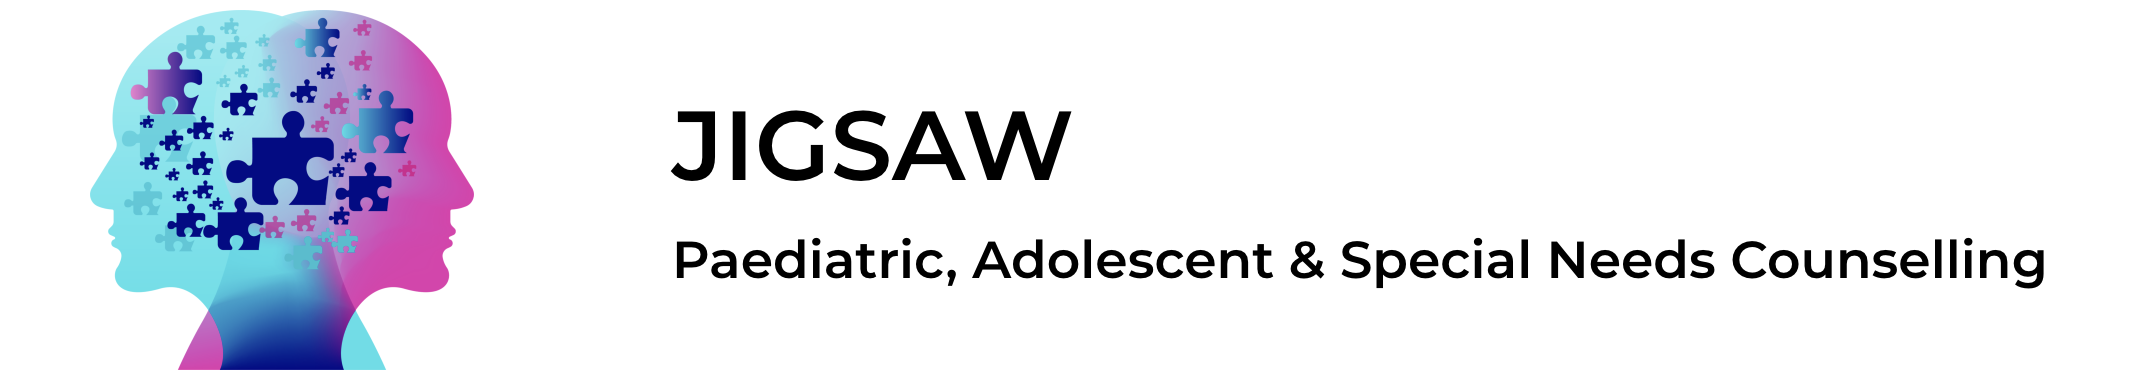 Jigsaw Paediatric, Adolescent & Special Needs Counselling